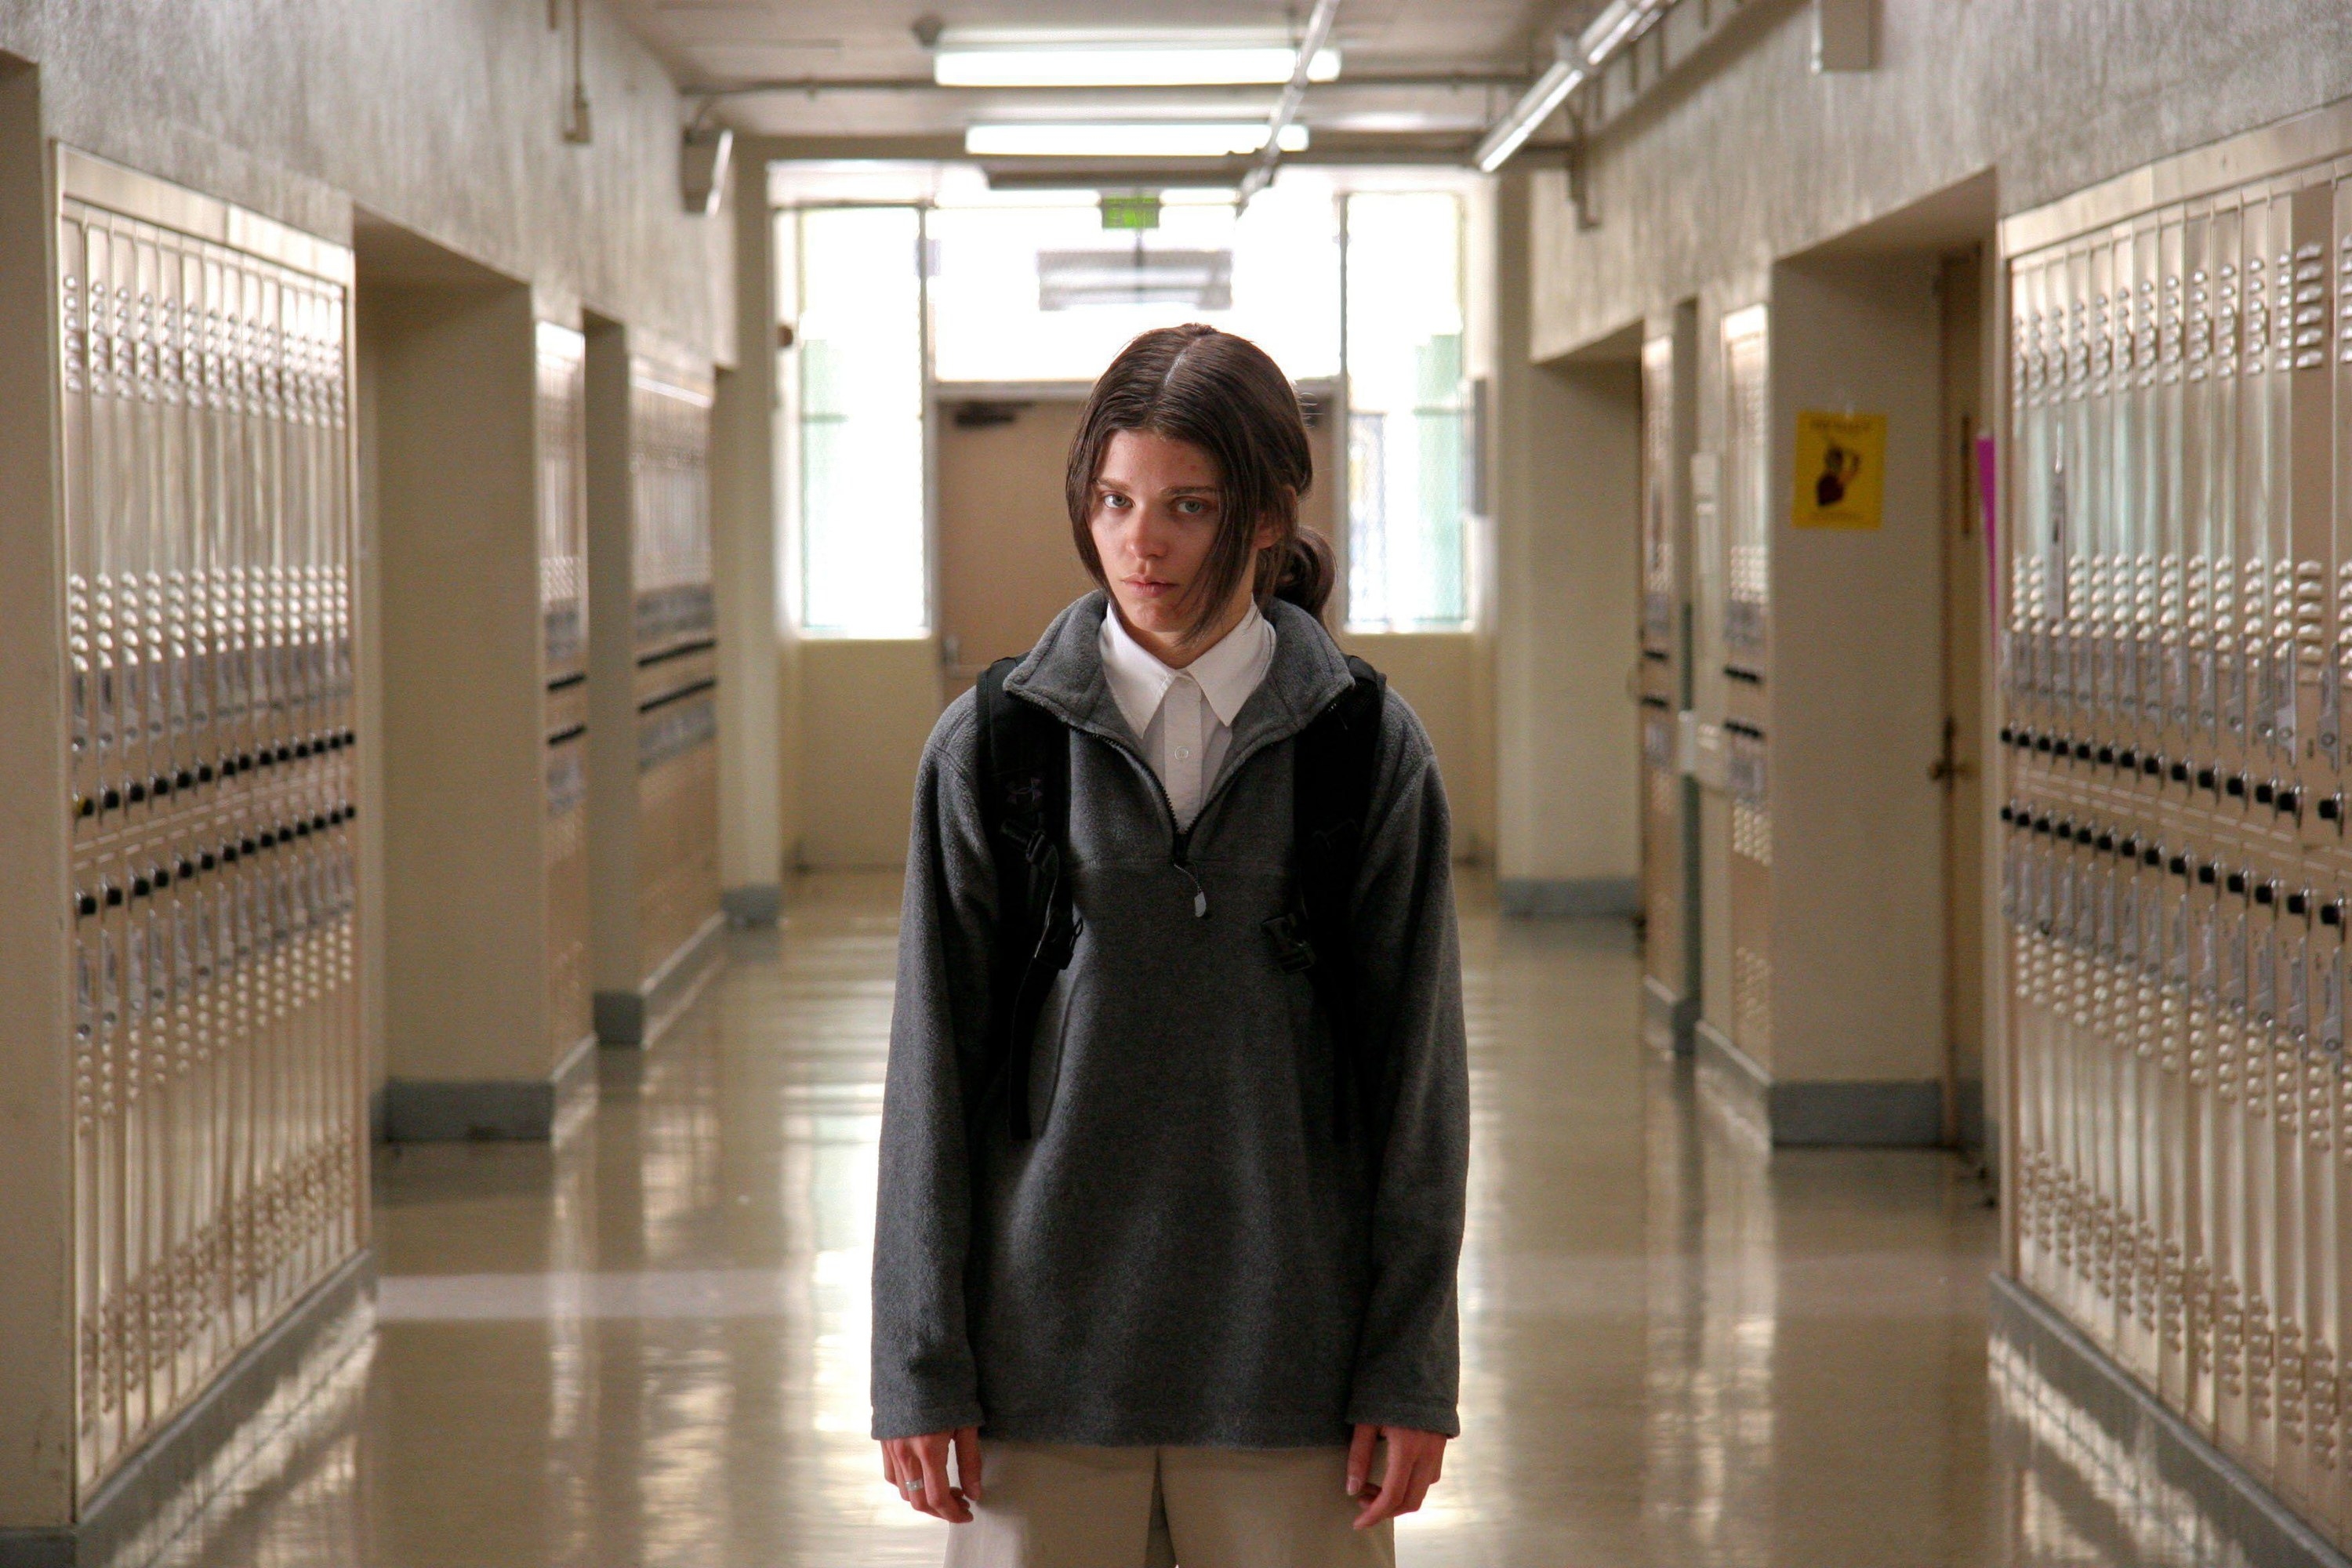 An unnerving young woman stands ominously in a high school hallway